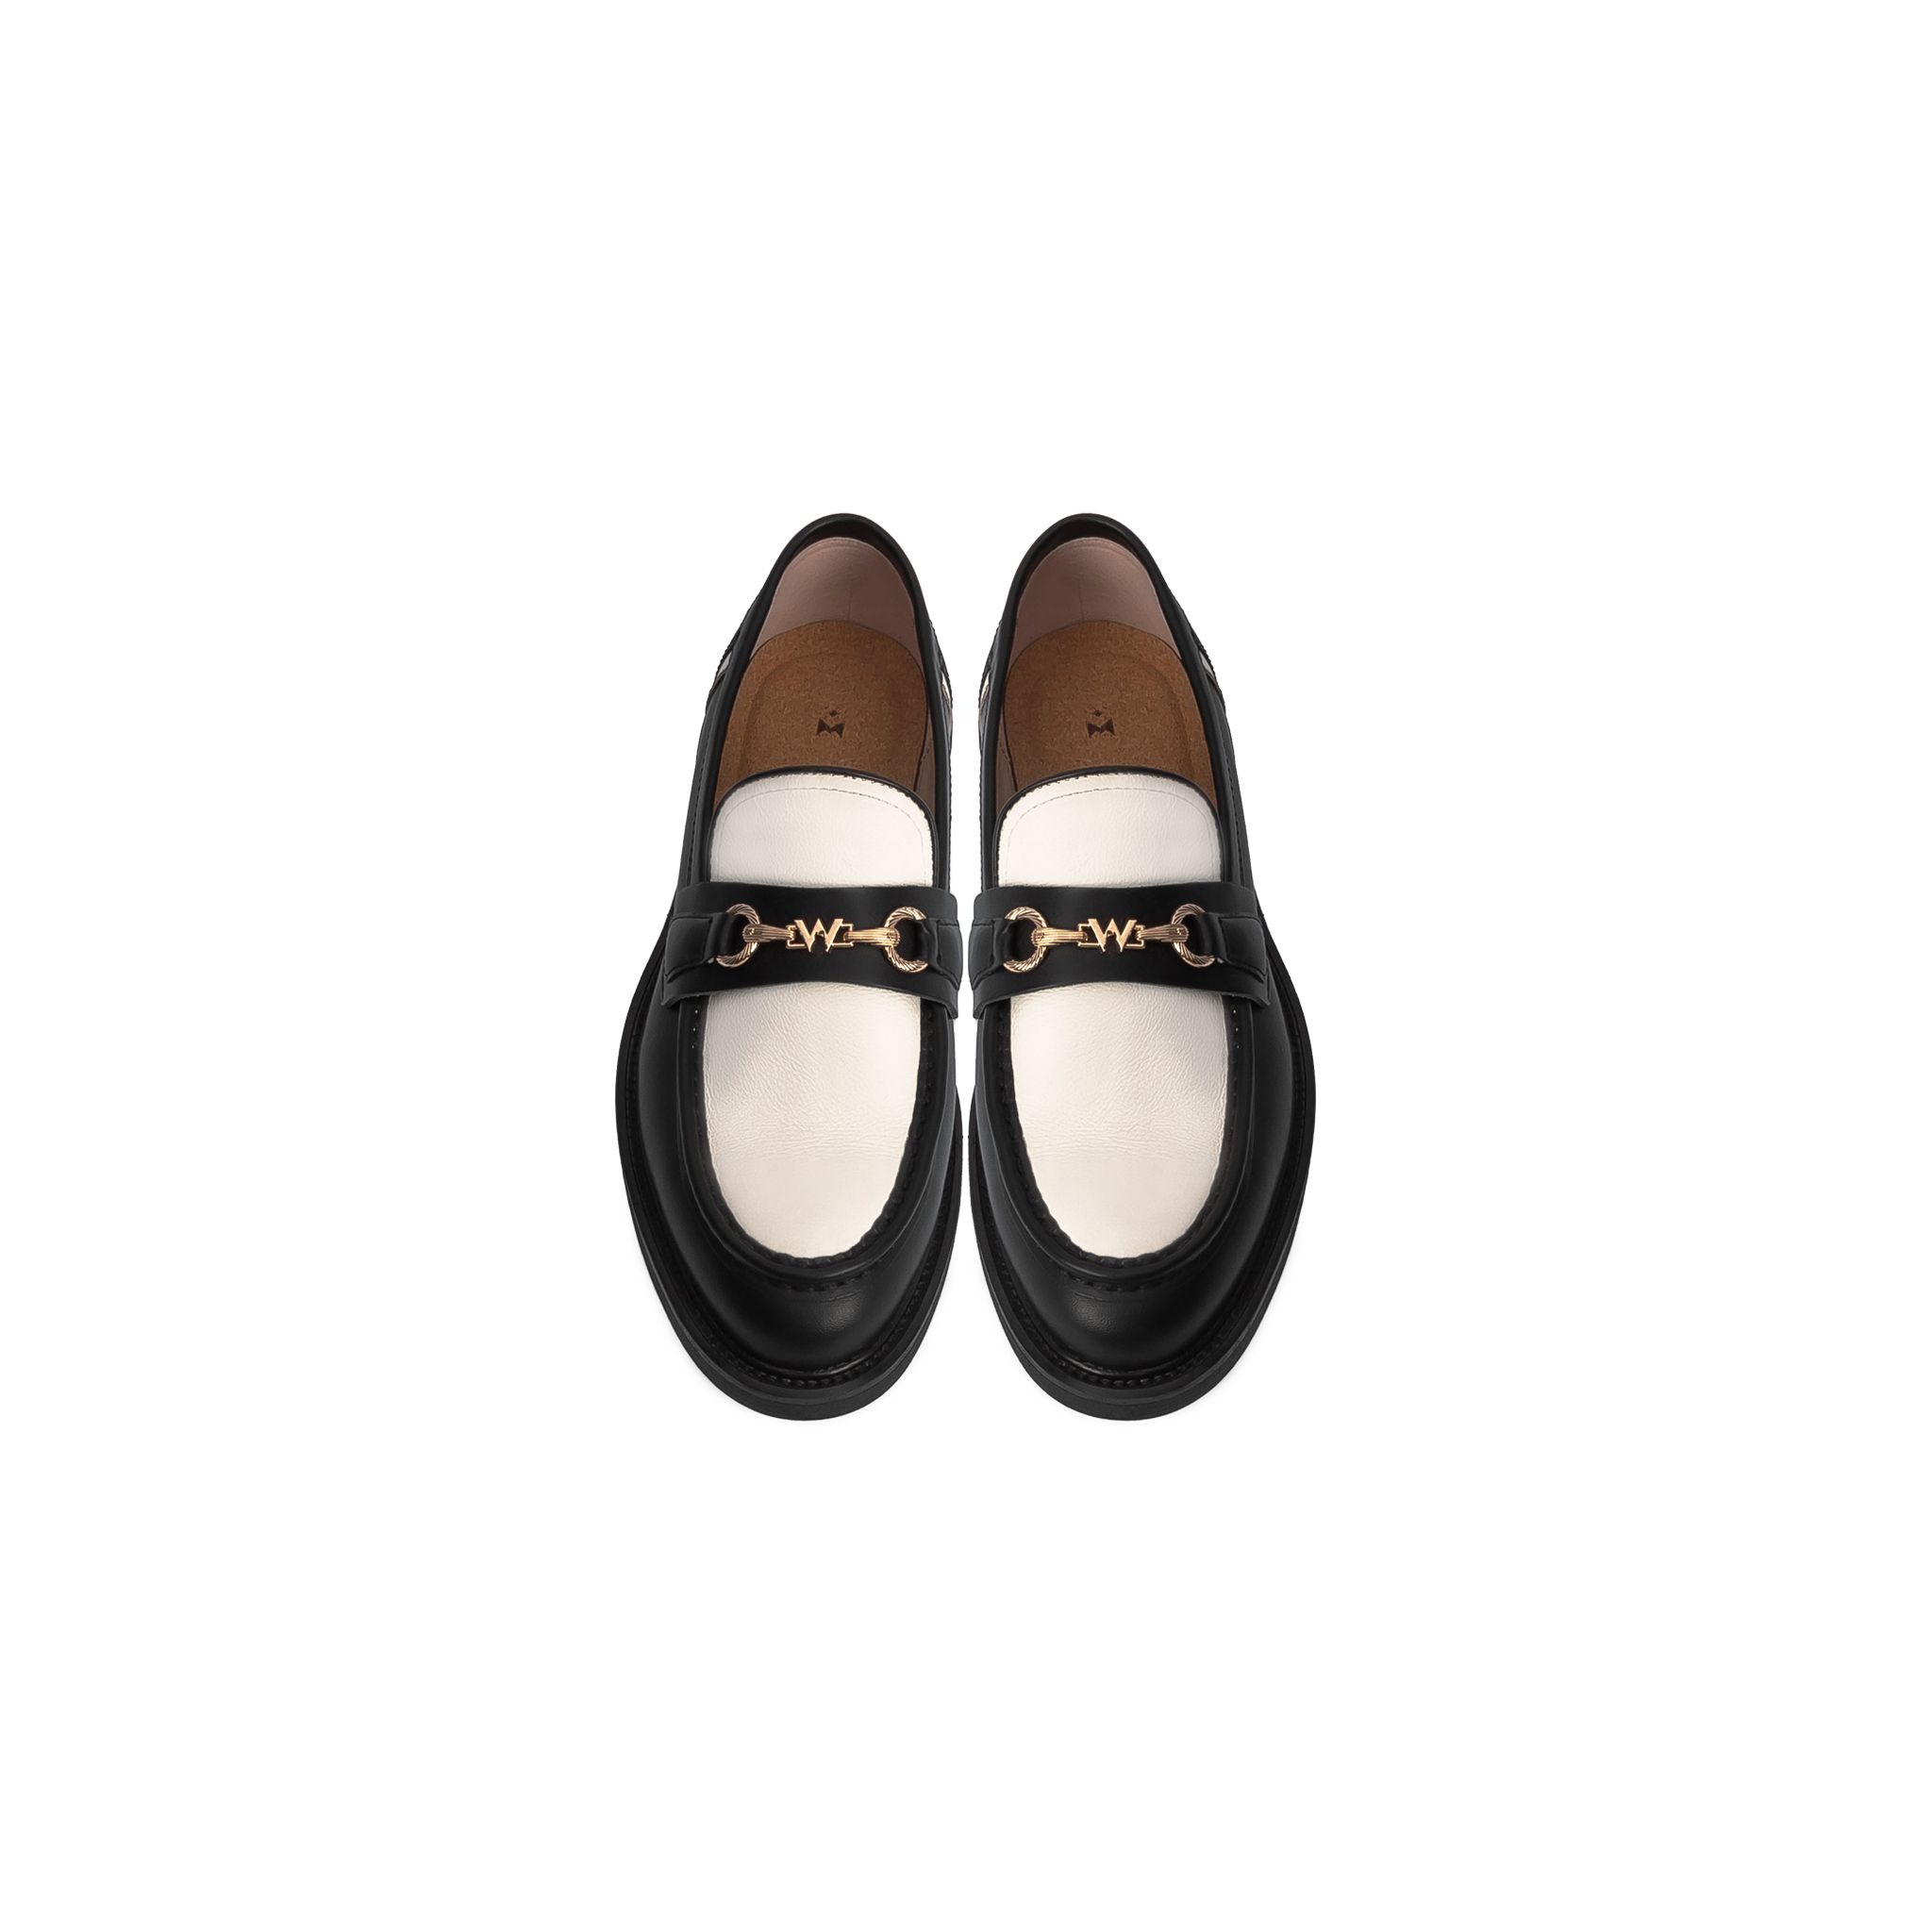  THE SEAN LADY WOLF MODERN LOAFER - BLACK OFF WHITE 